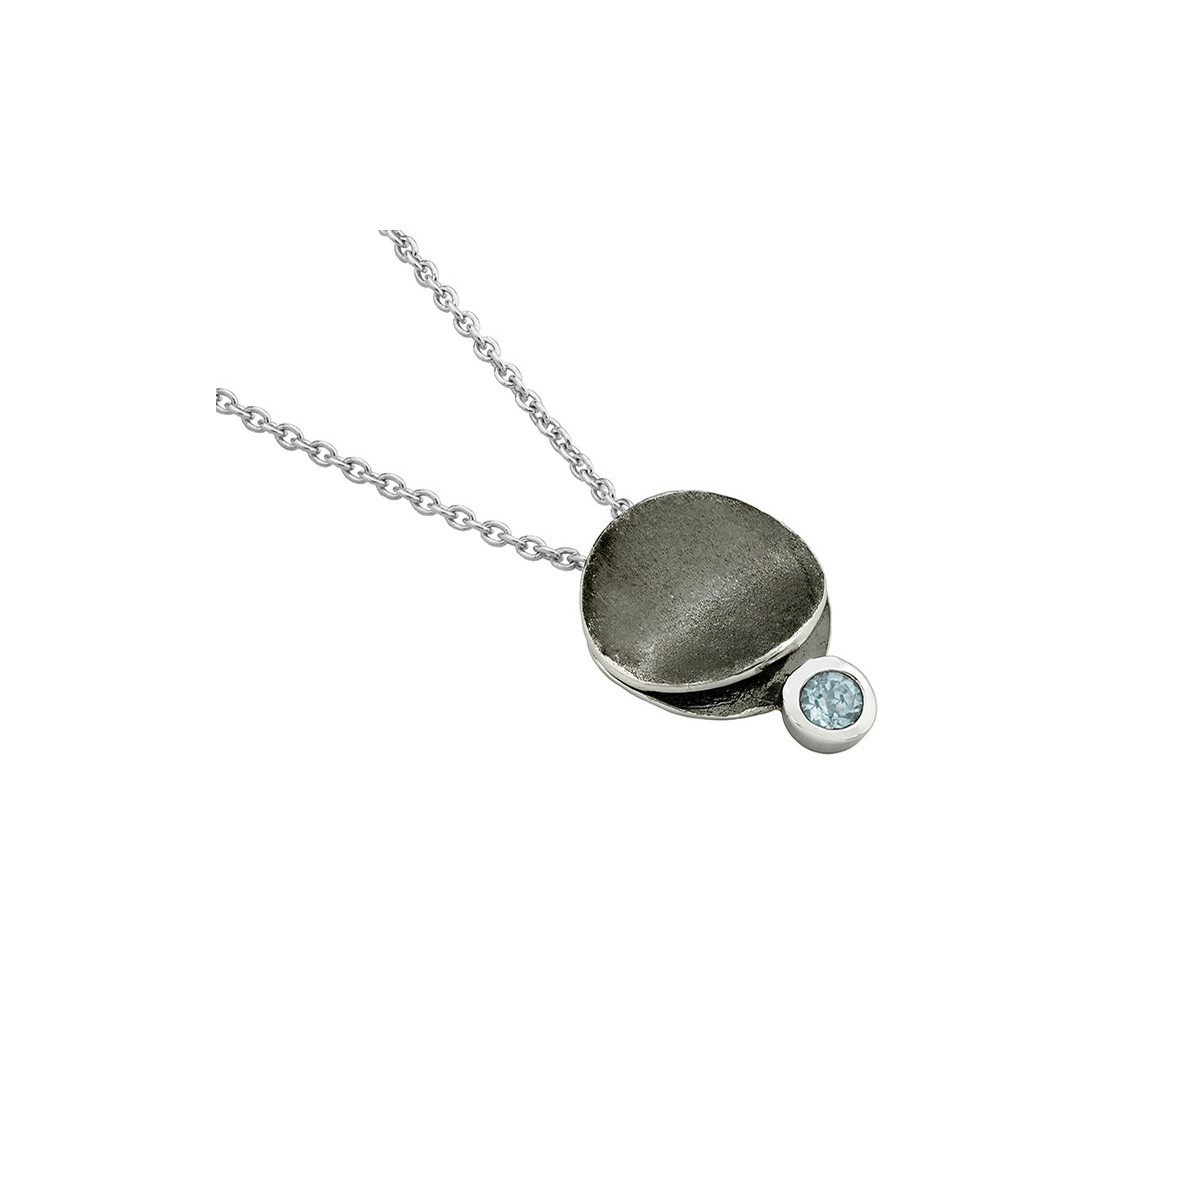 MOON Necklace in Silver. Black Ruthenium